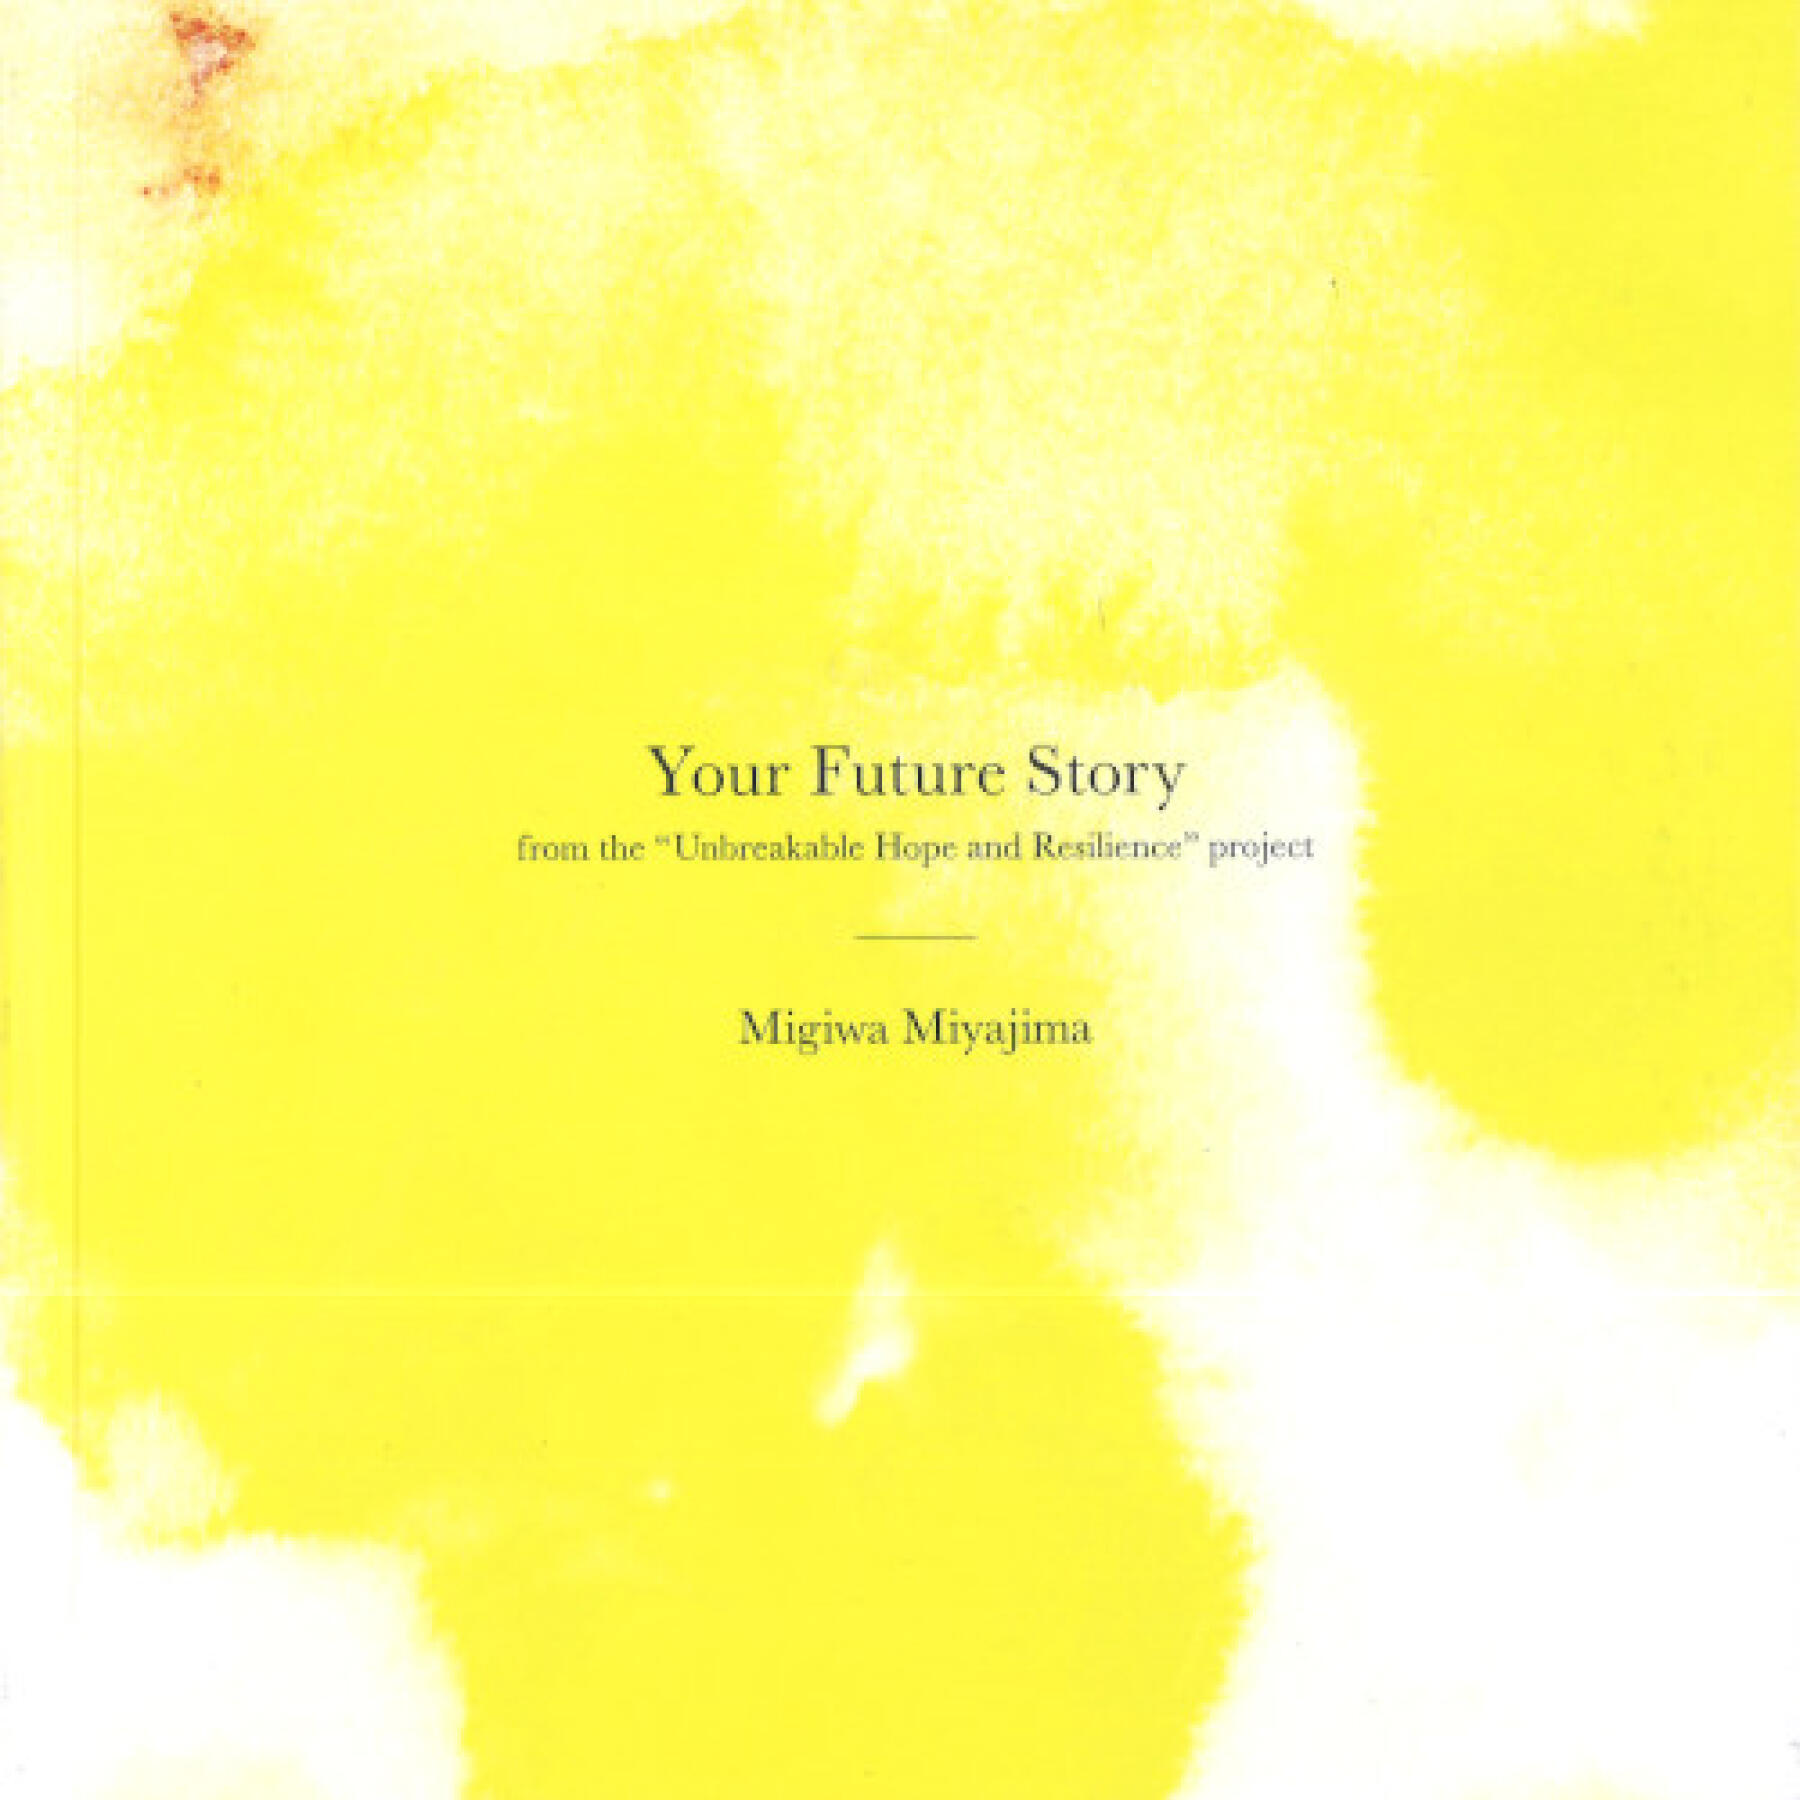 Your Future Story Limited Edition Hardcover Book + Music